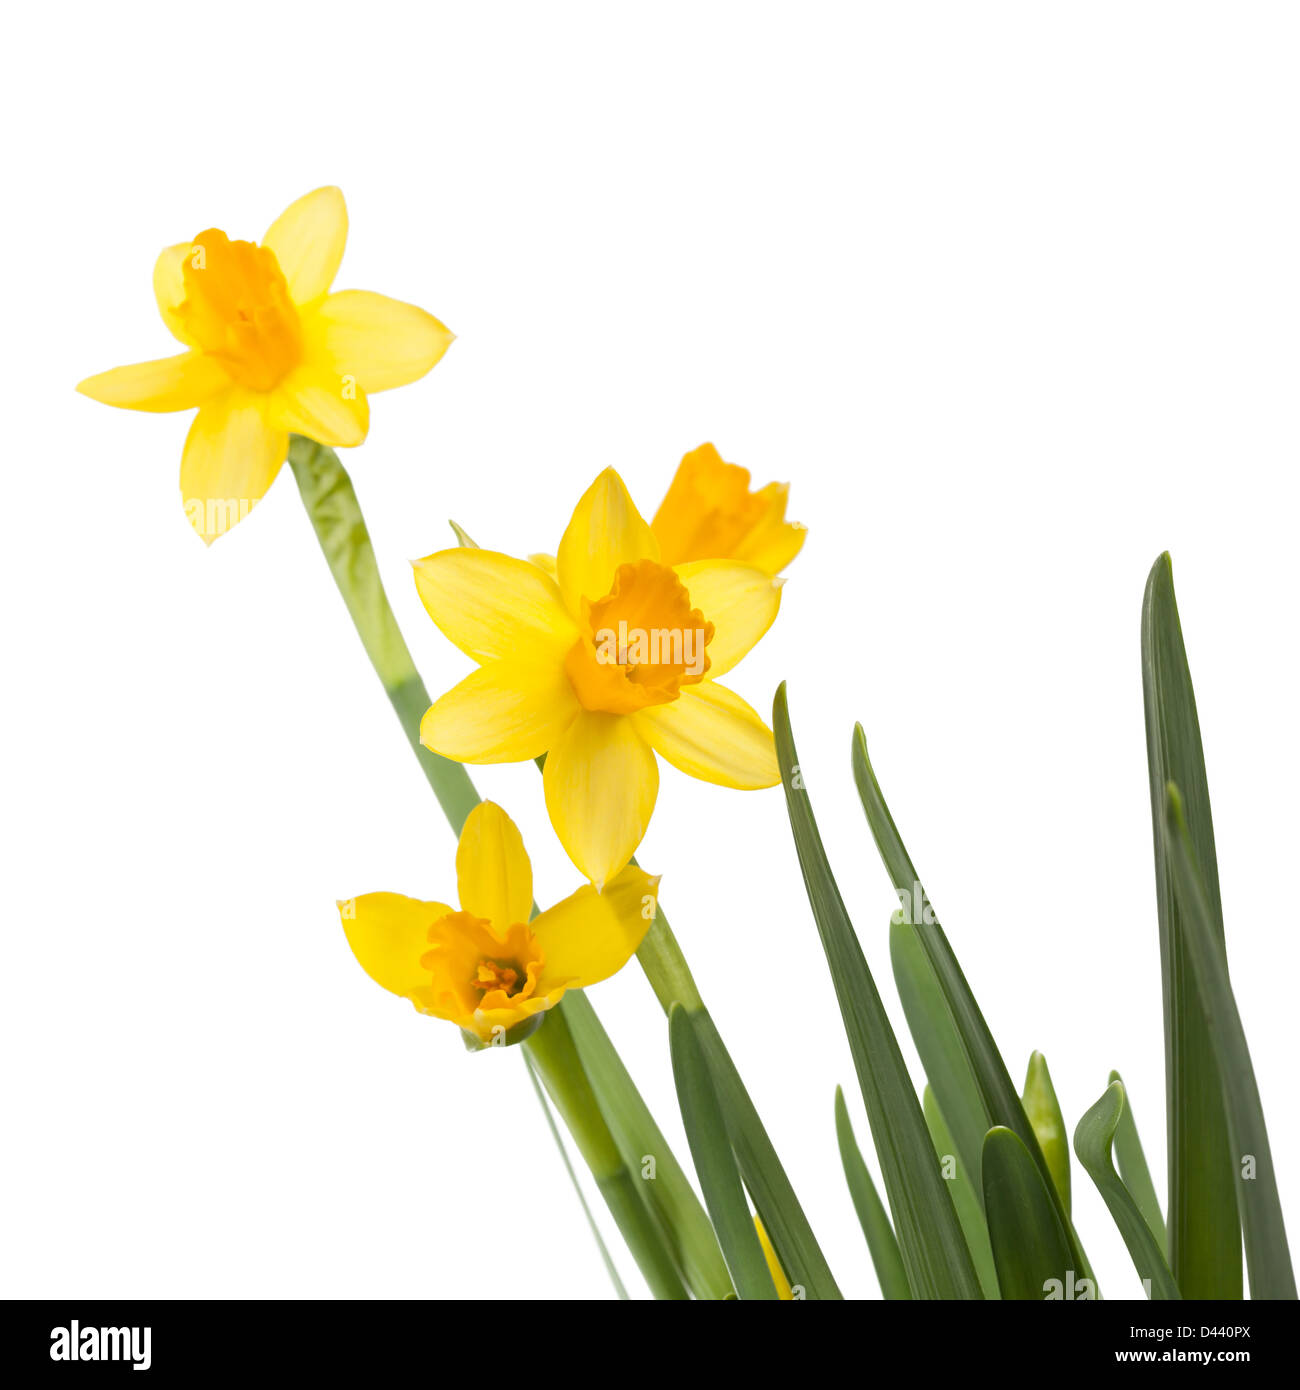 Yellow daffodils flowers isolated on white Stock Photo